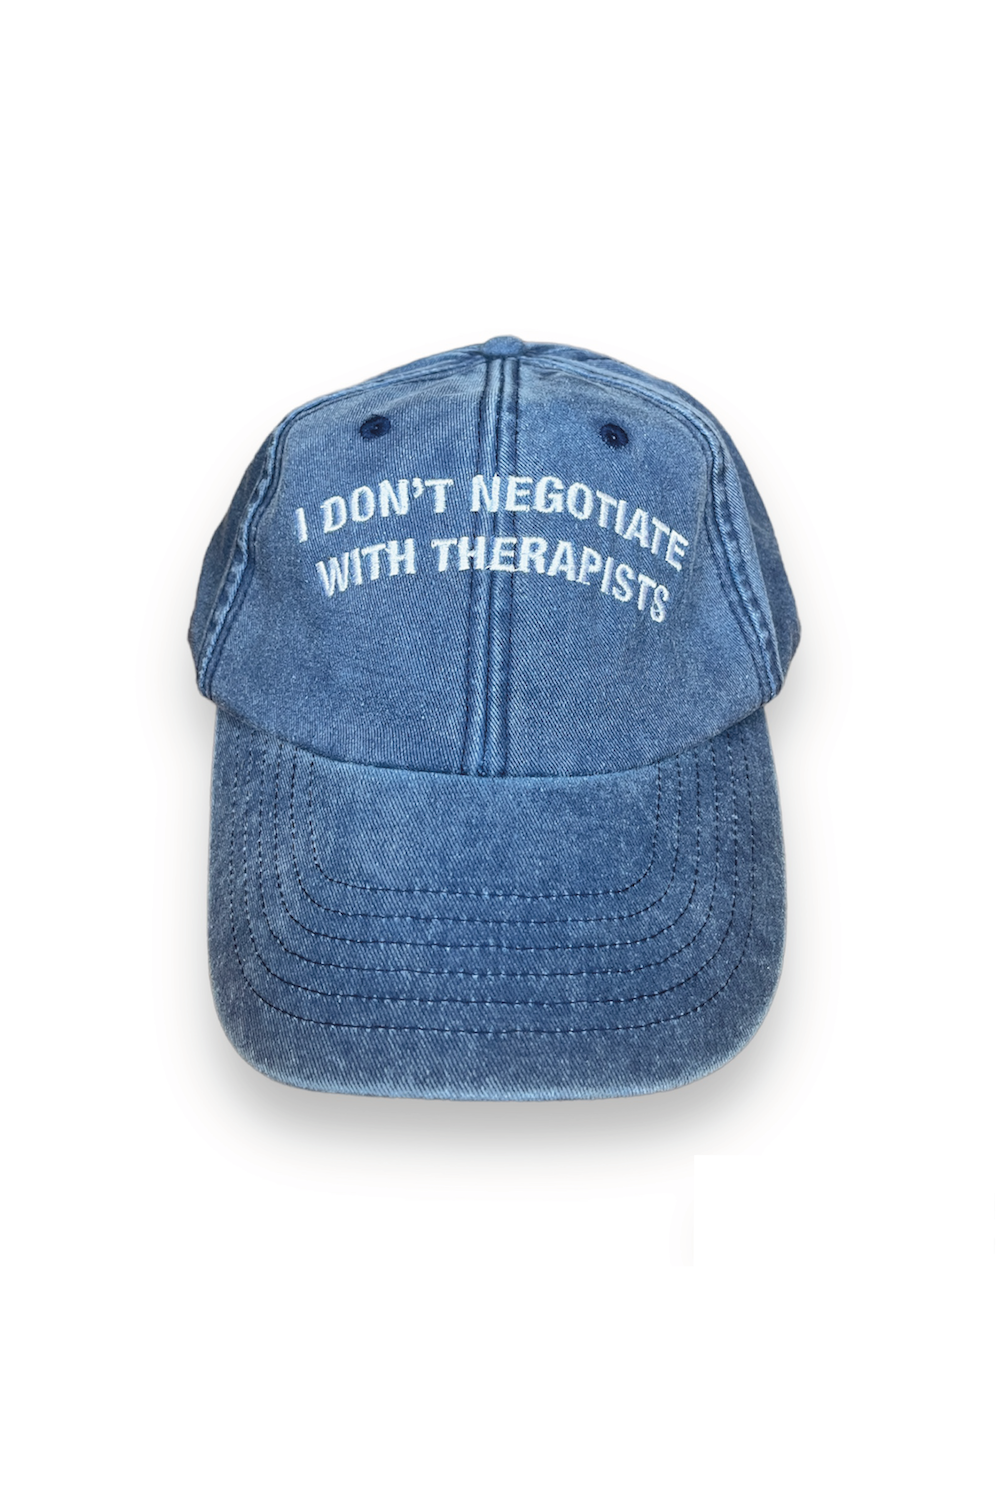 CASQUETTE I DON'T NEGOTIATE WITH THERAPISTS